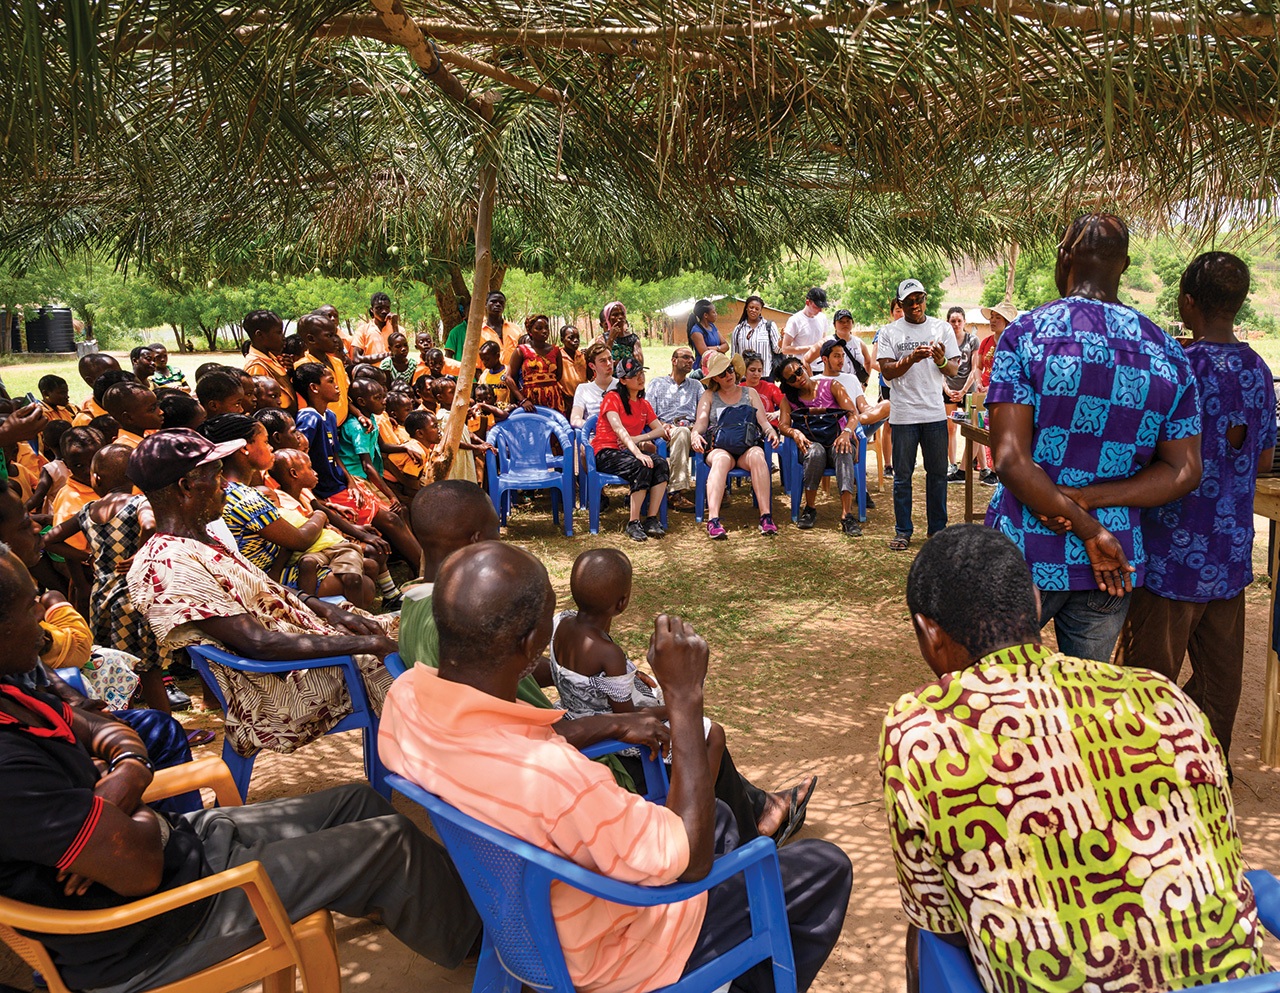 NYU Stern students and the Woadze Tsatoe community members share ideas for sustainable business ventures to help support the Ghanaian village’s economic growth.